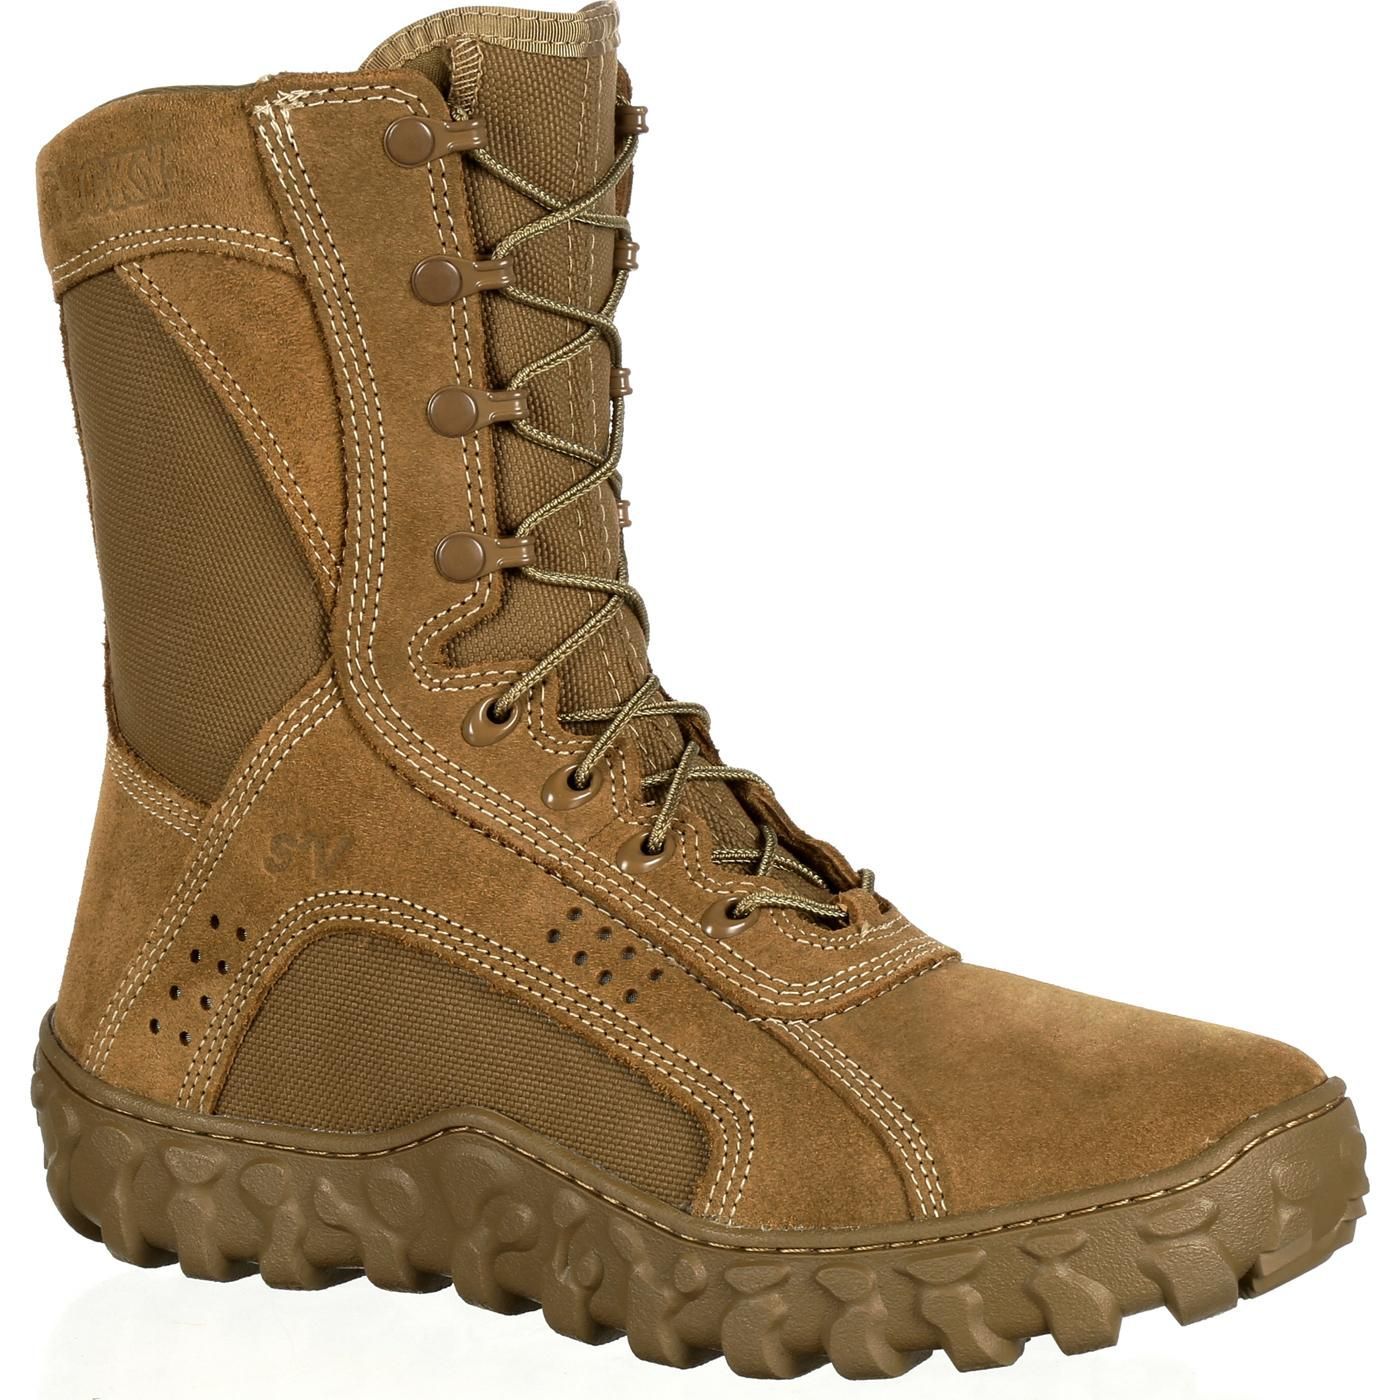 Rocky S2V Tactical Military Boots for Men - Coyote Brown - 11W